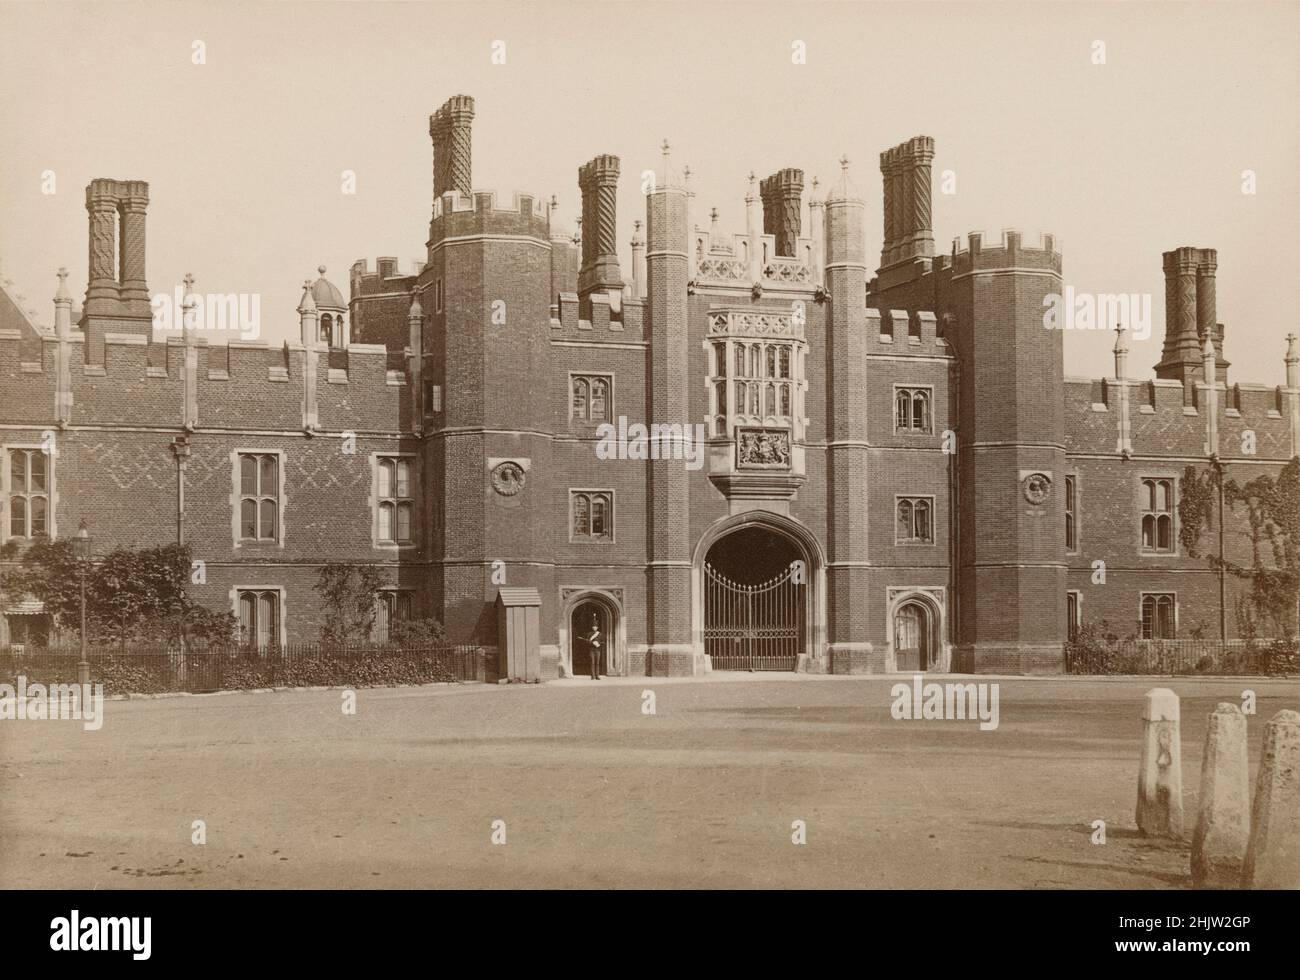 Antique circa 1890 photograph of the Great Gatehouse at the Hampton Court Palace in London, England. SOURCE: ORIGINAL ALBUMEN PHOTOGRAPH Stock Photo